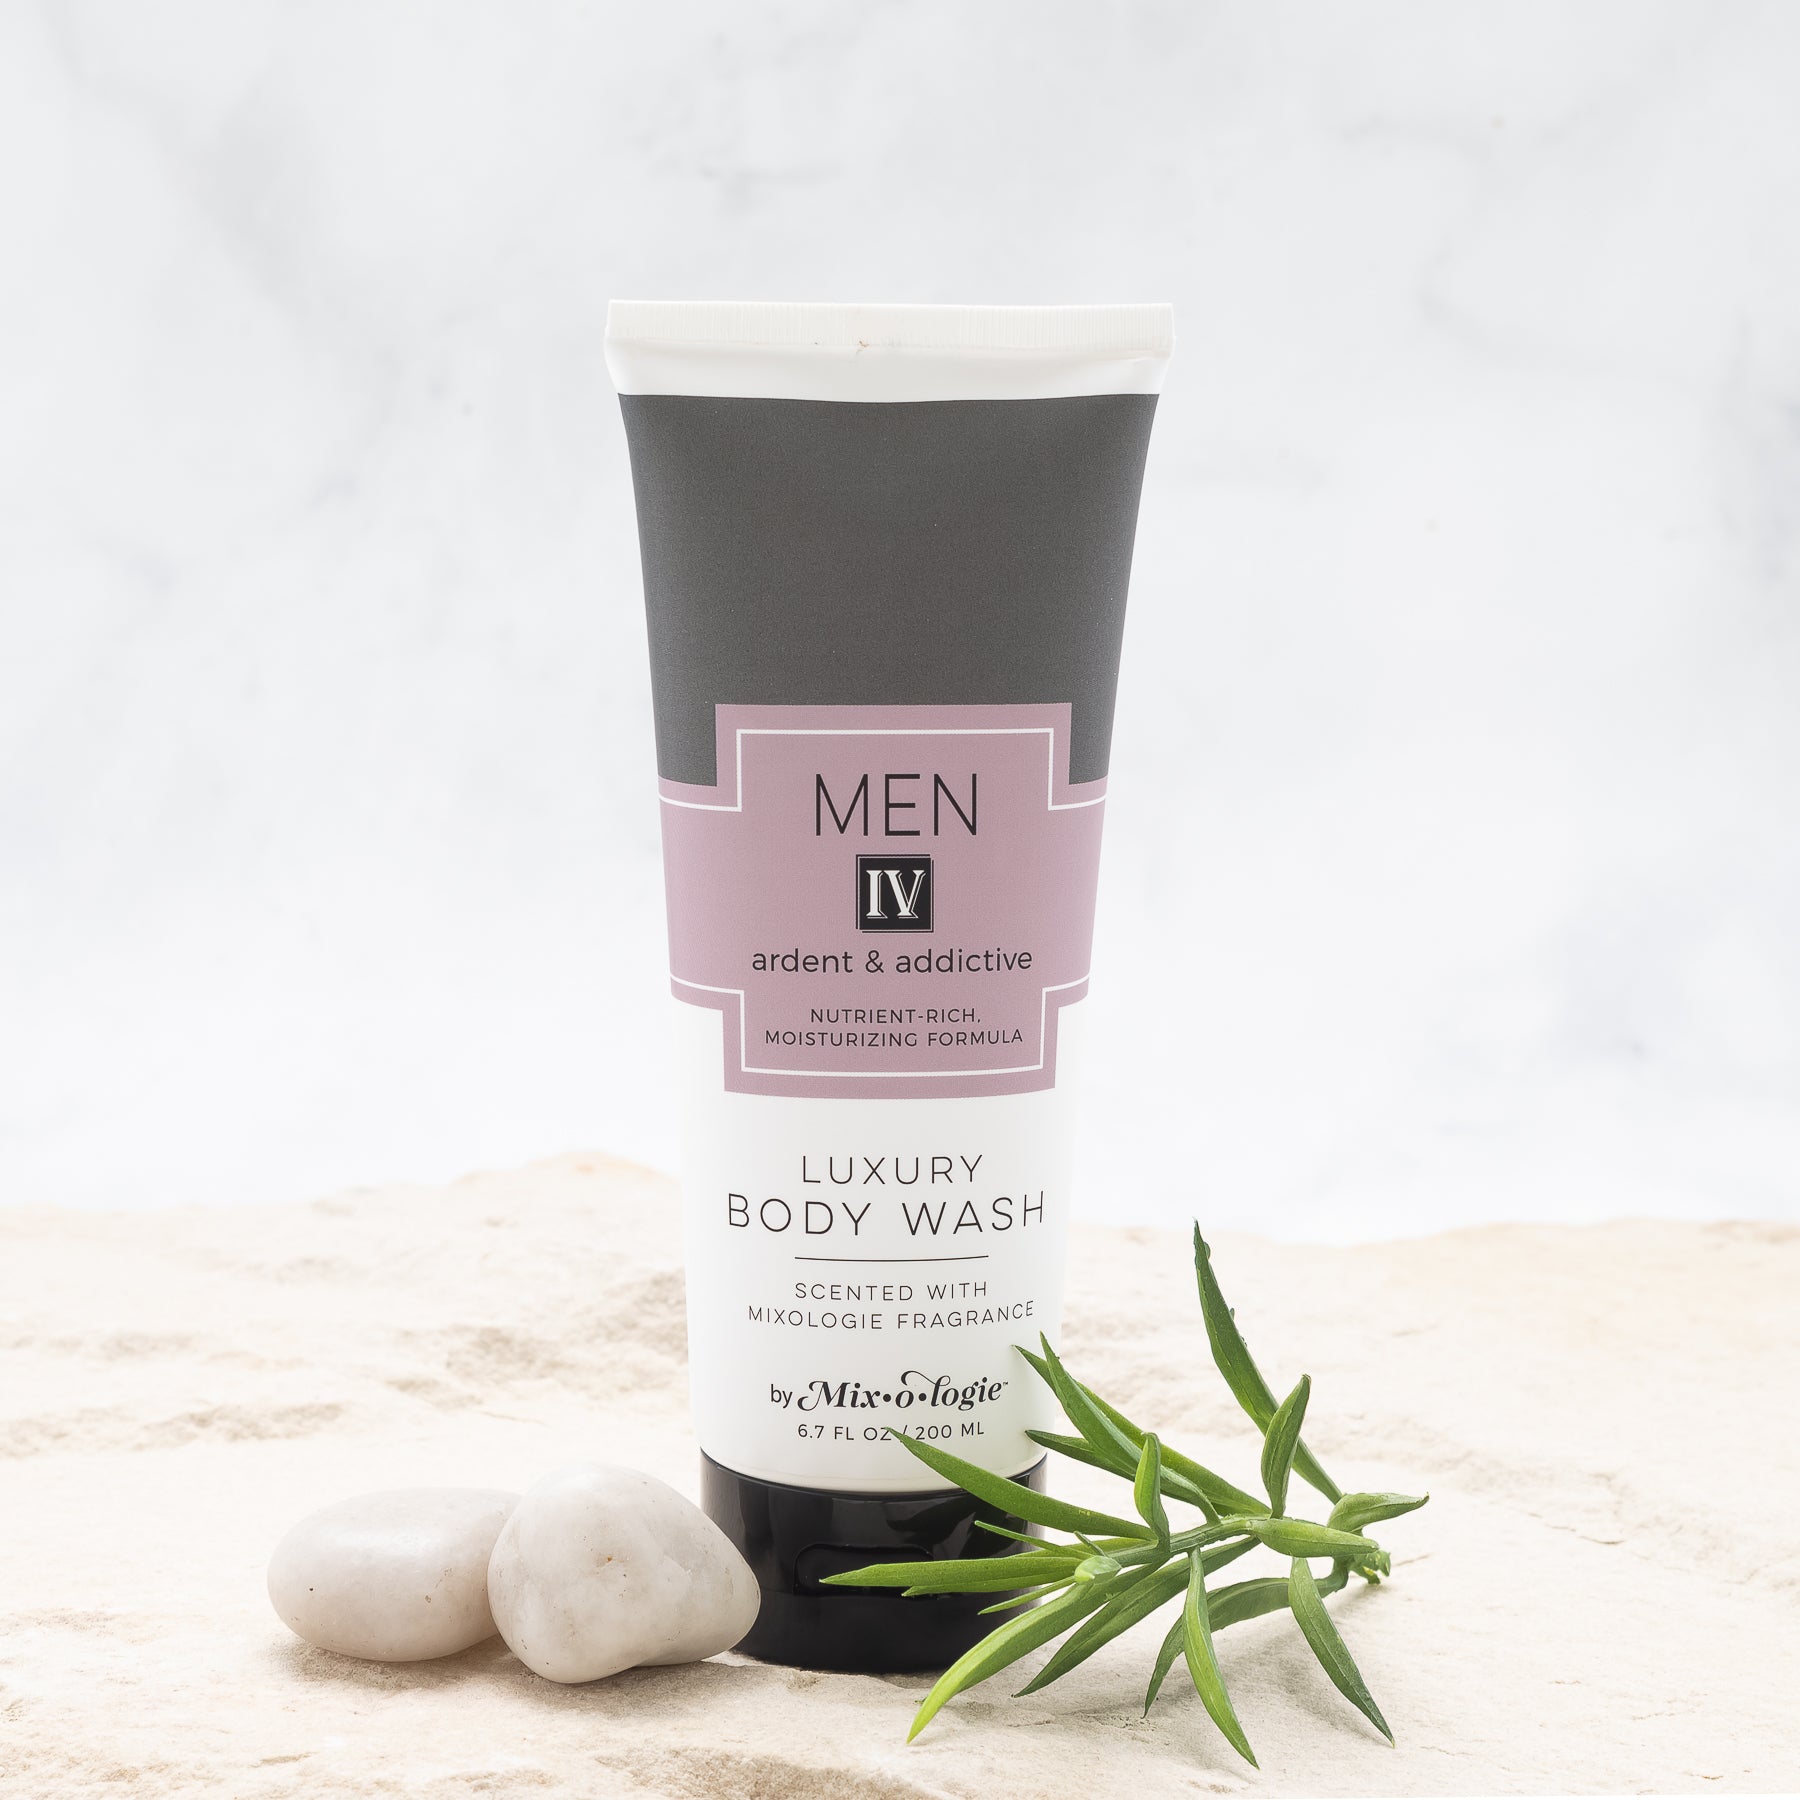 Luxury Body Wash in Men IV (Ardent & Addictive) in grey color package with salmon colored label in sand with rocks and greenery.